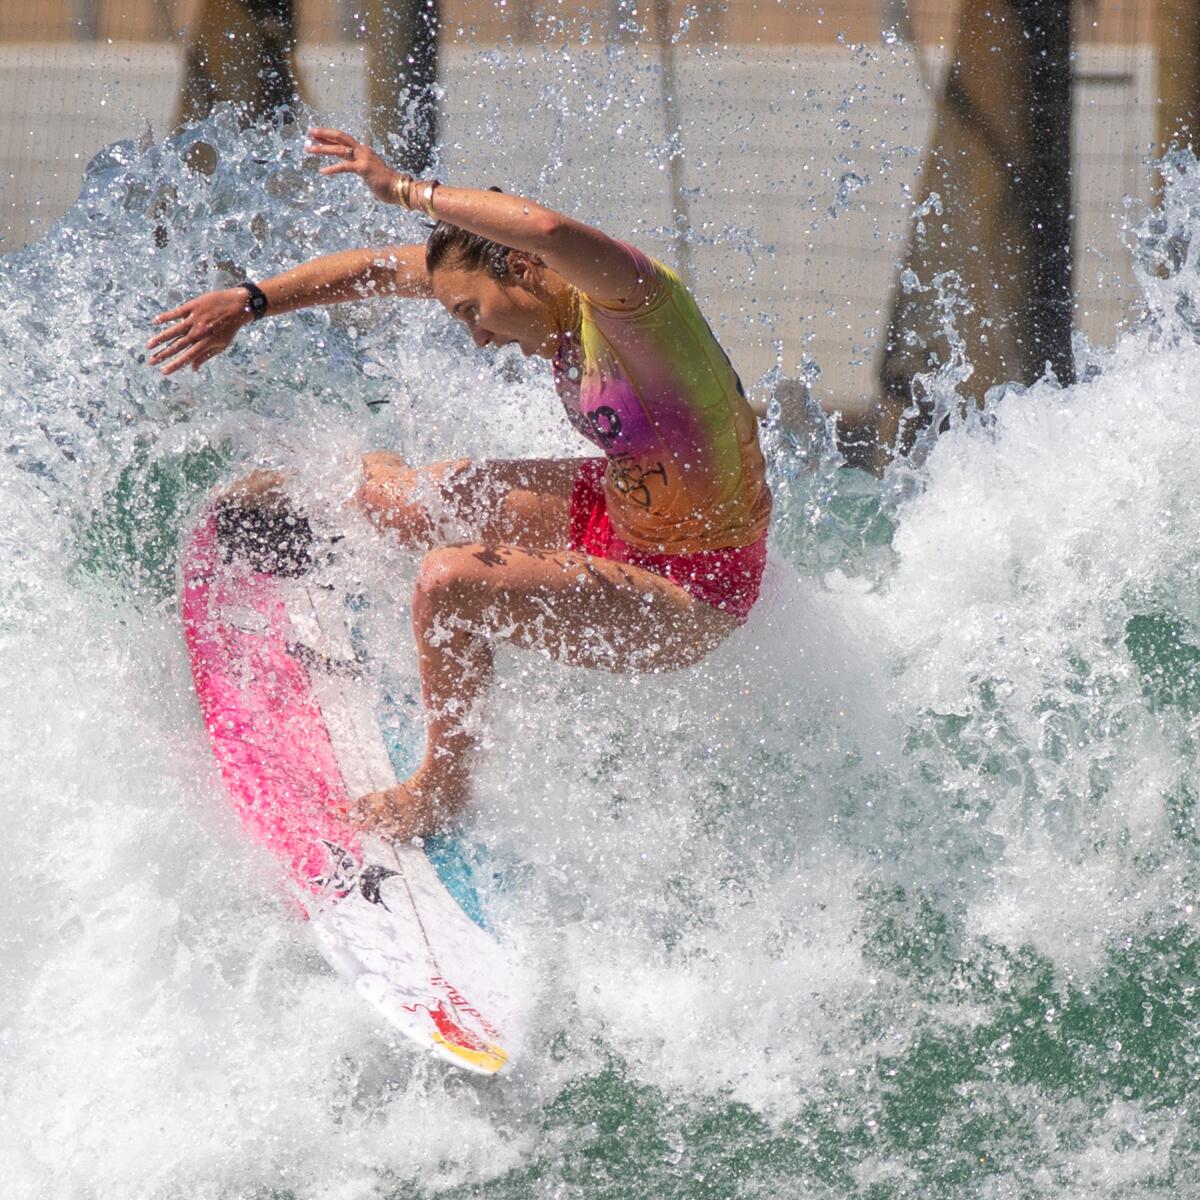 A woman on a pink, white and blue surfboard rides the waves.